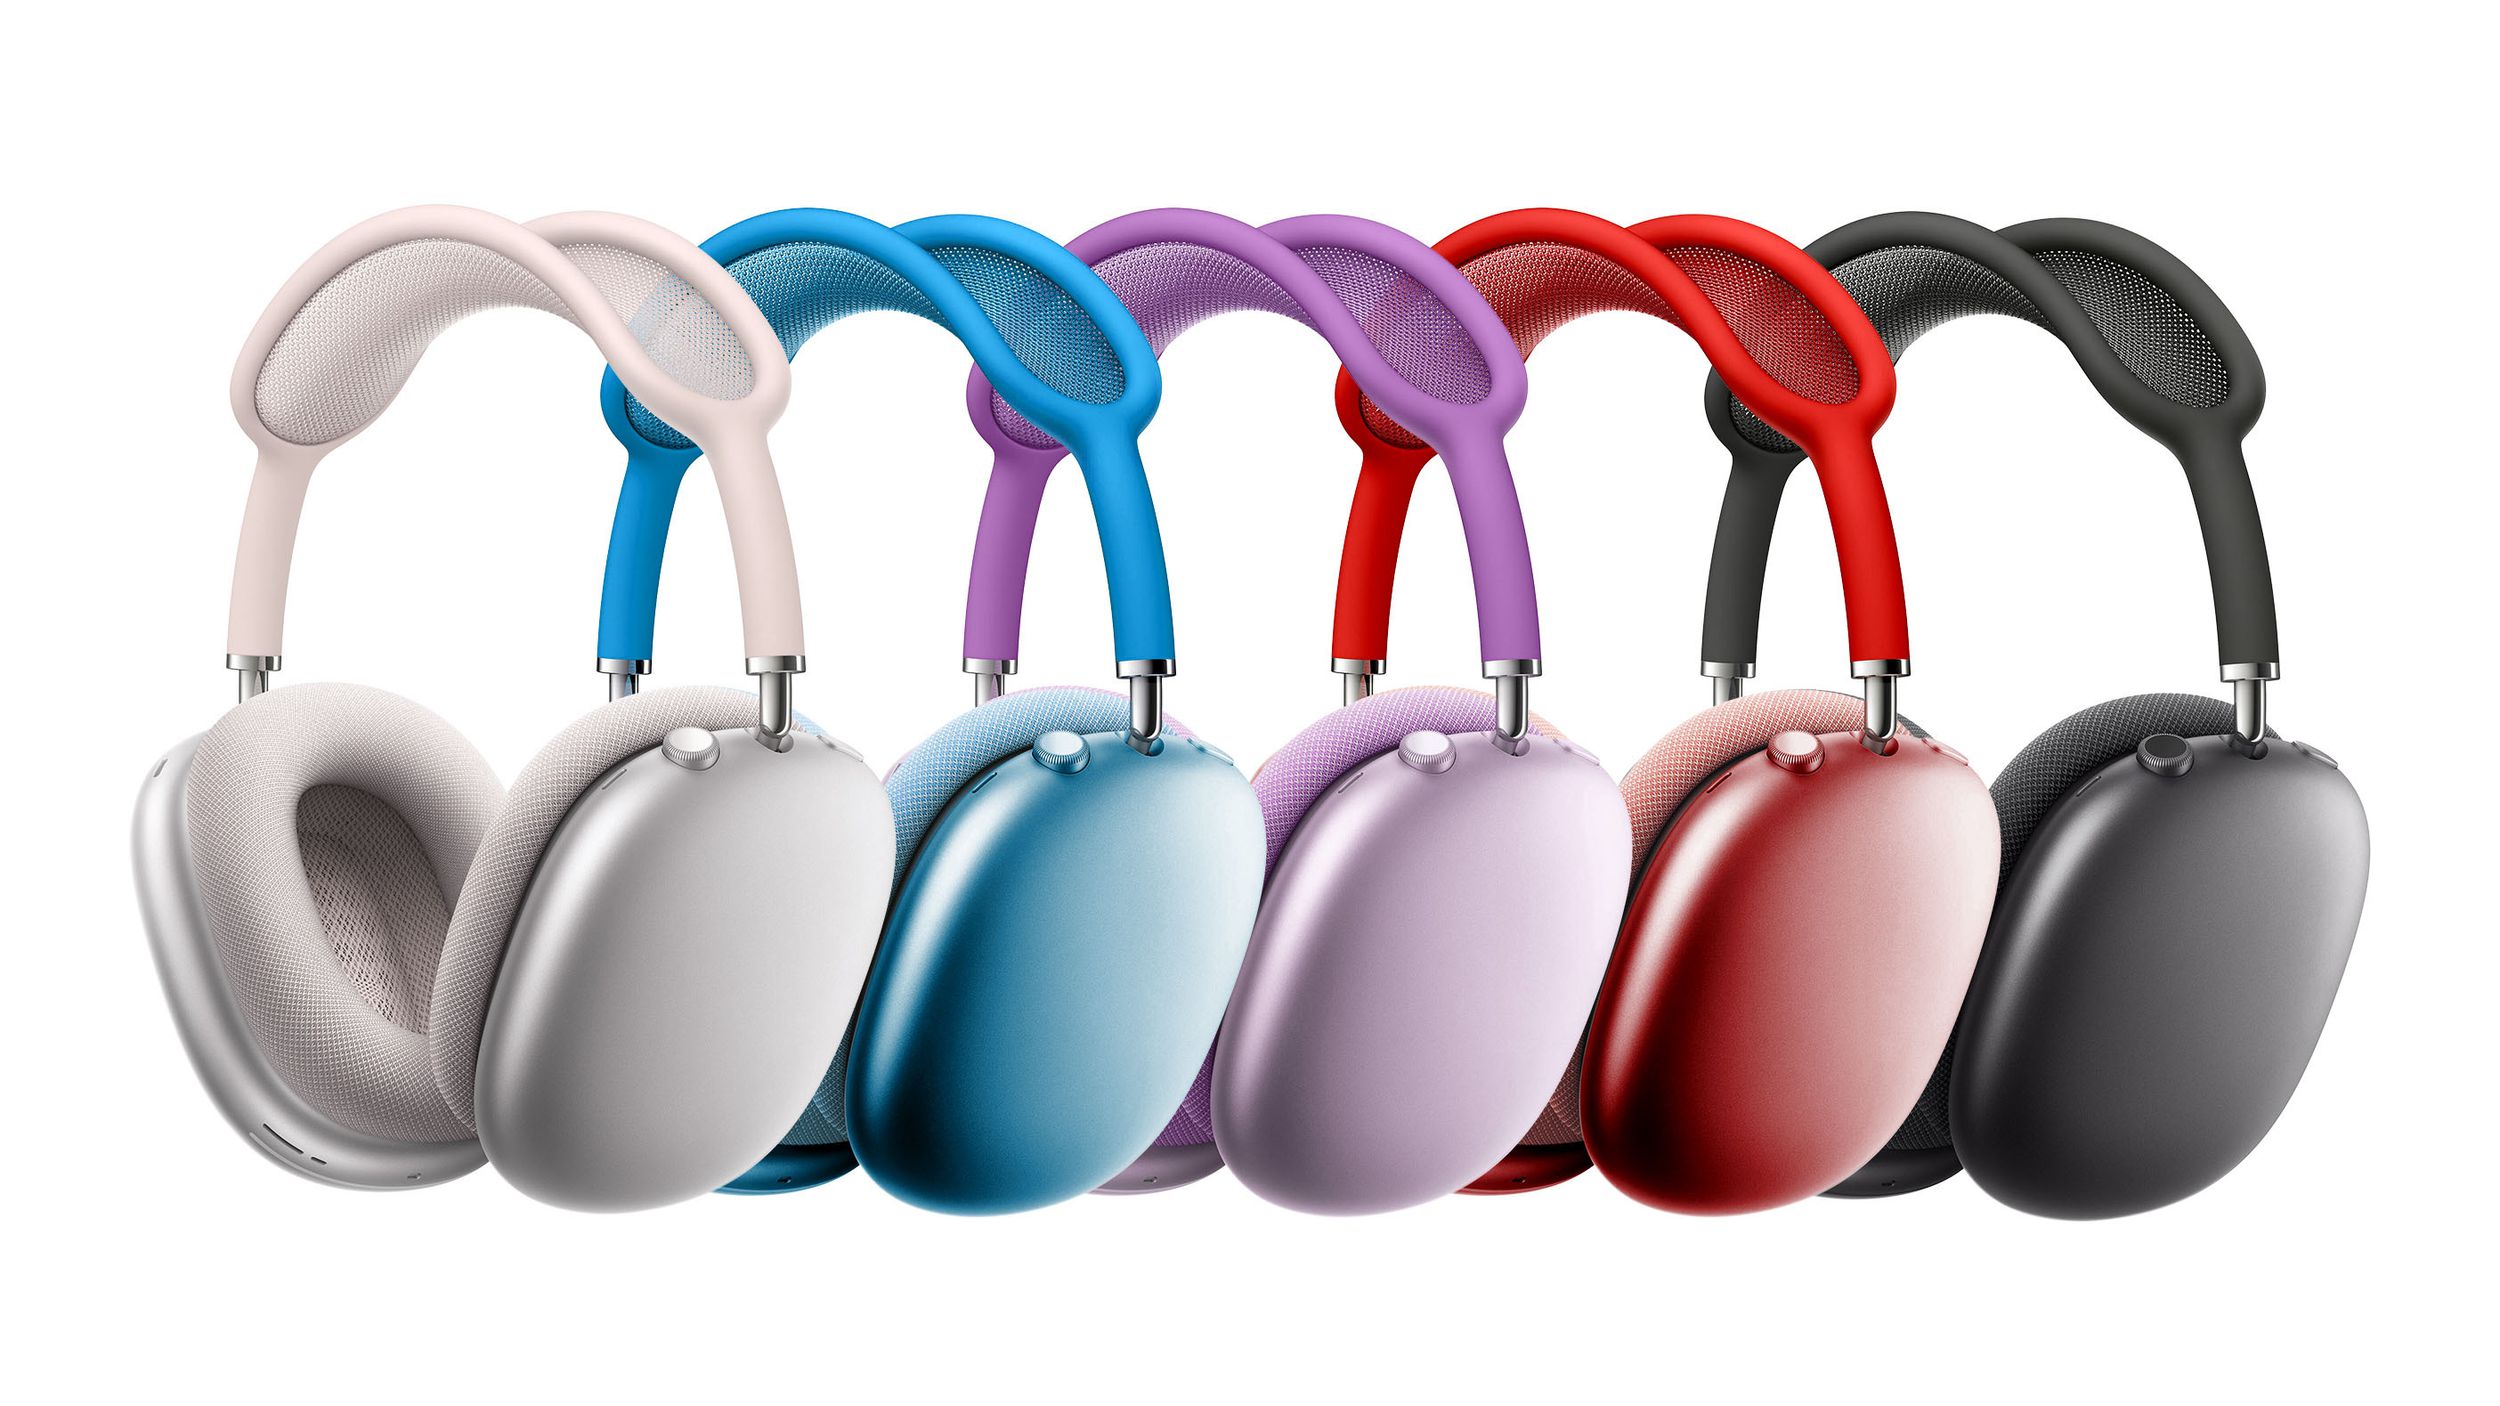 What New AirPods Max Colors Could Be Coming? MacRumors